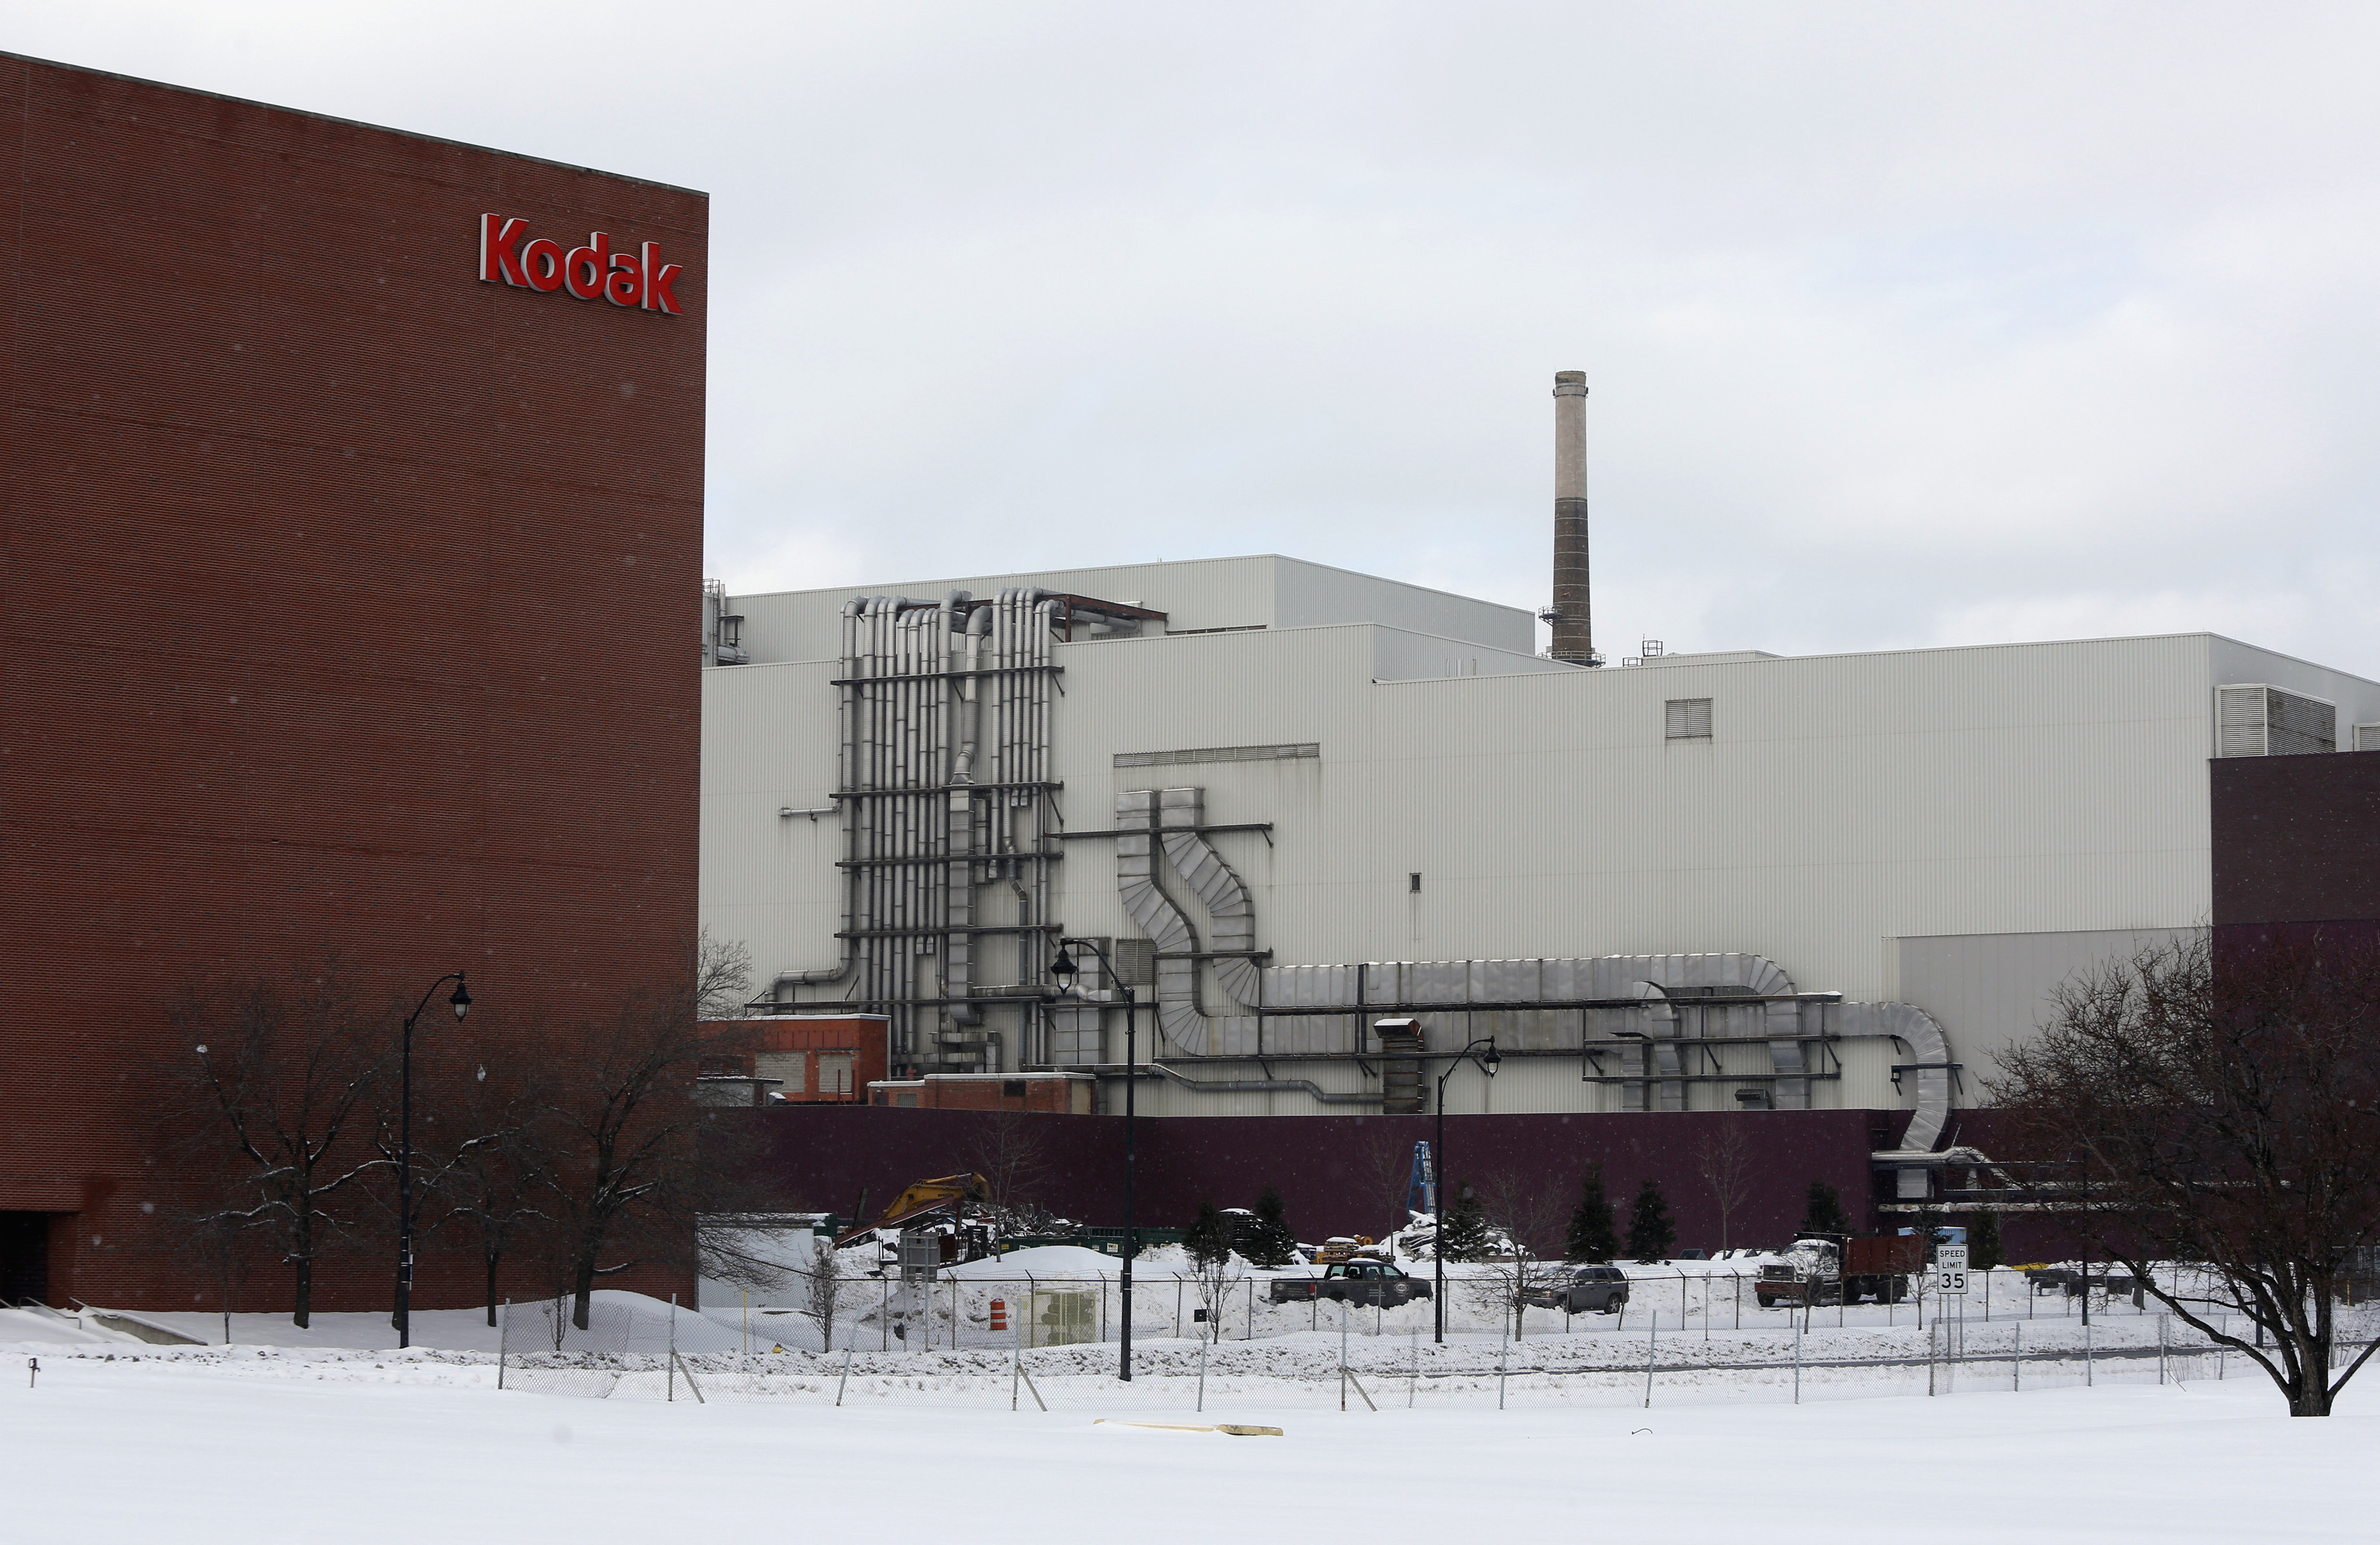 A general view of the now mostly unused Kodak factory in Rochester, New York